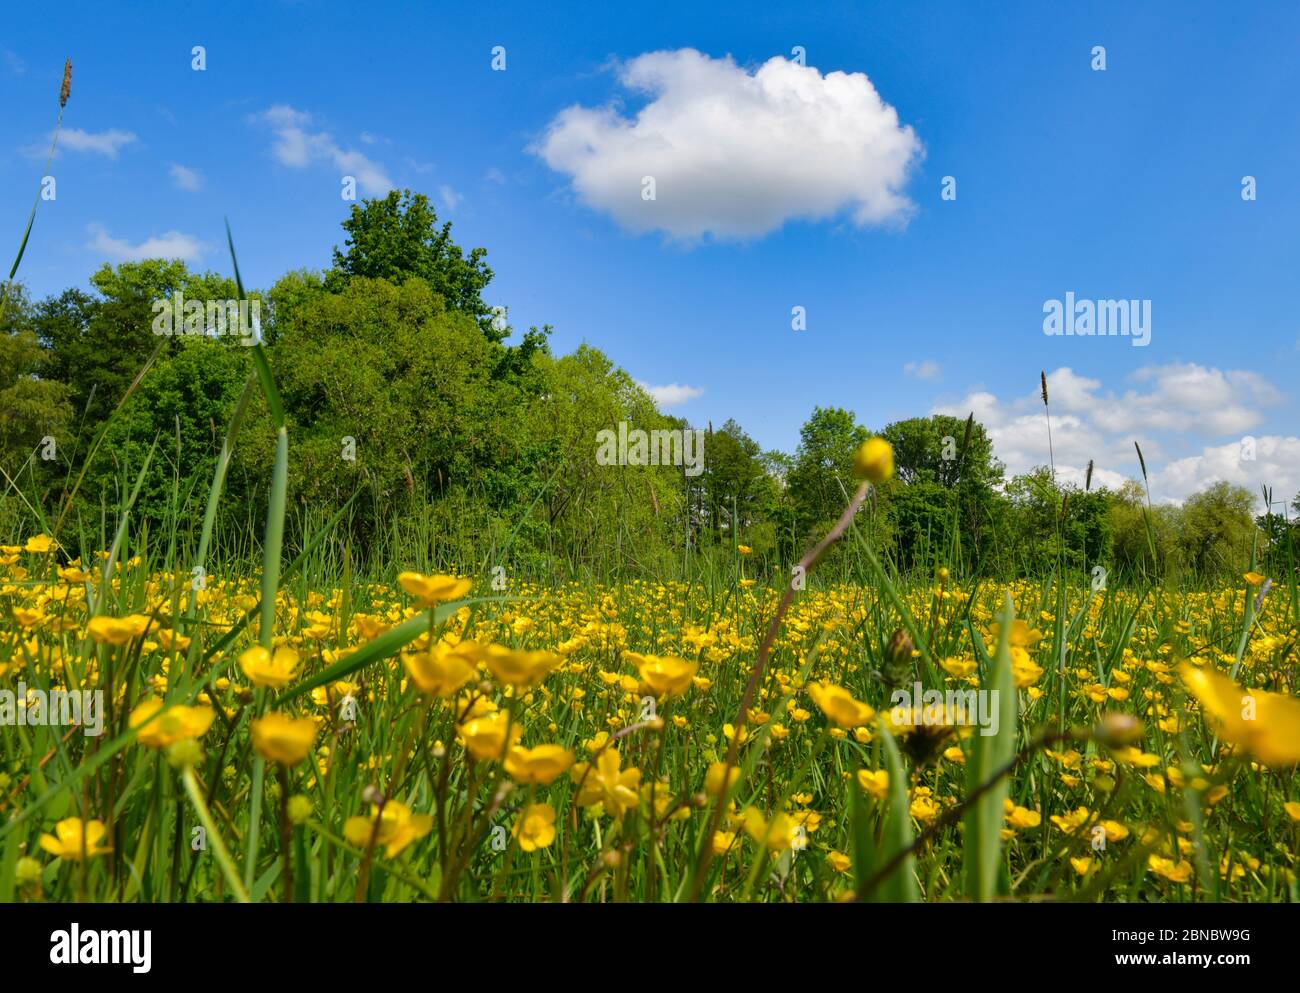 Lehde, Germany. 14th May, 2020. Bright yellow buttercup flowers bloom on a wet meadow in the Spreewald. The Spreewald is called Blota in Lower Sorbian, 'the swamps'. All Spreewald rivers together make a length of more than 1000 kilometres. Credit: Patrick Pleul/dpa-Zentralbild/ZB/dpa/Alamy Live News Stock Photo